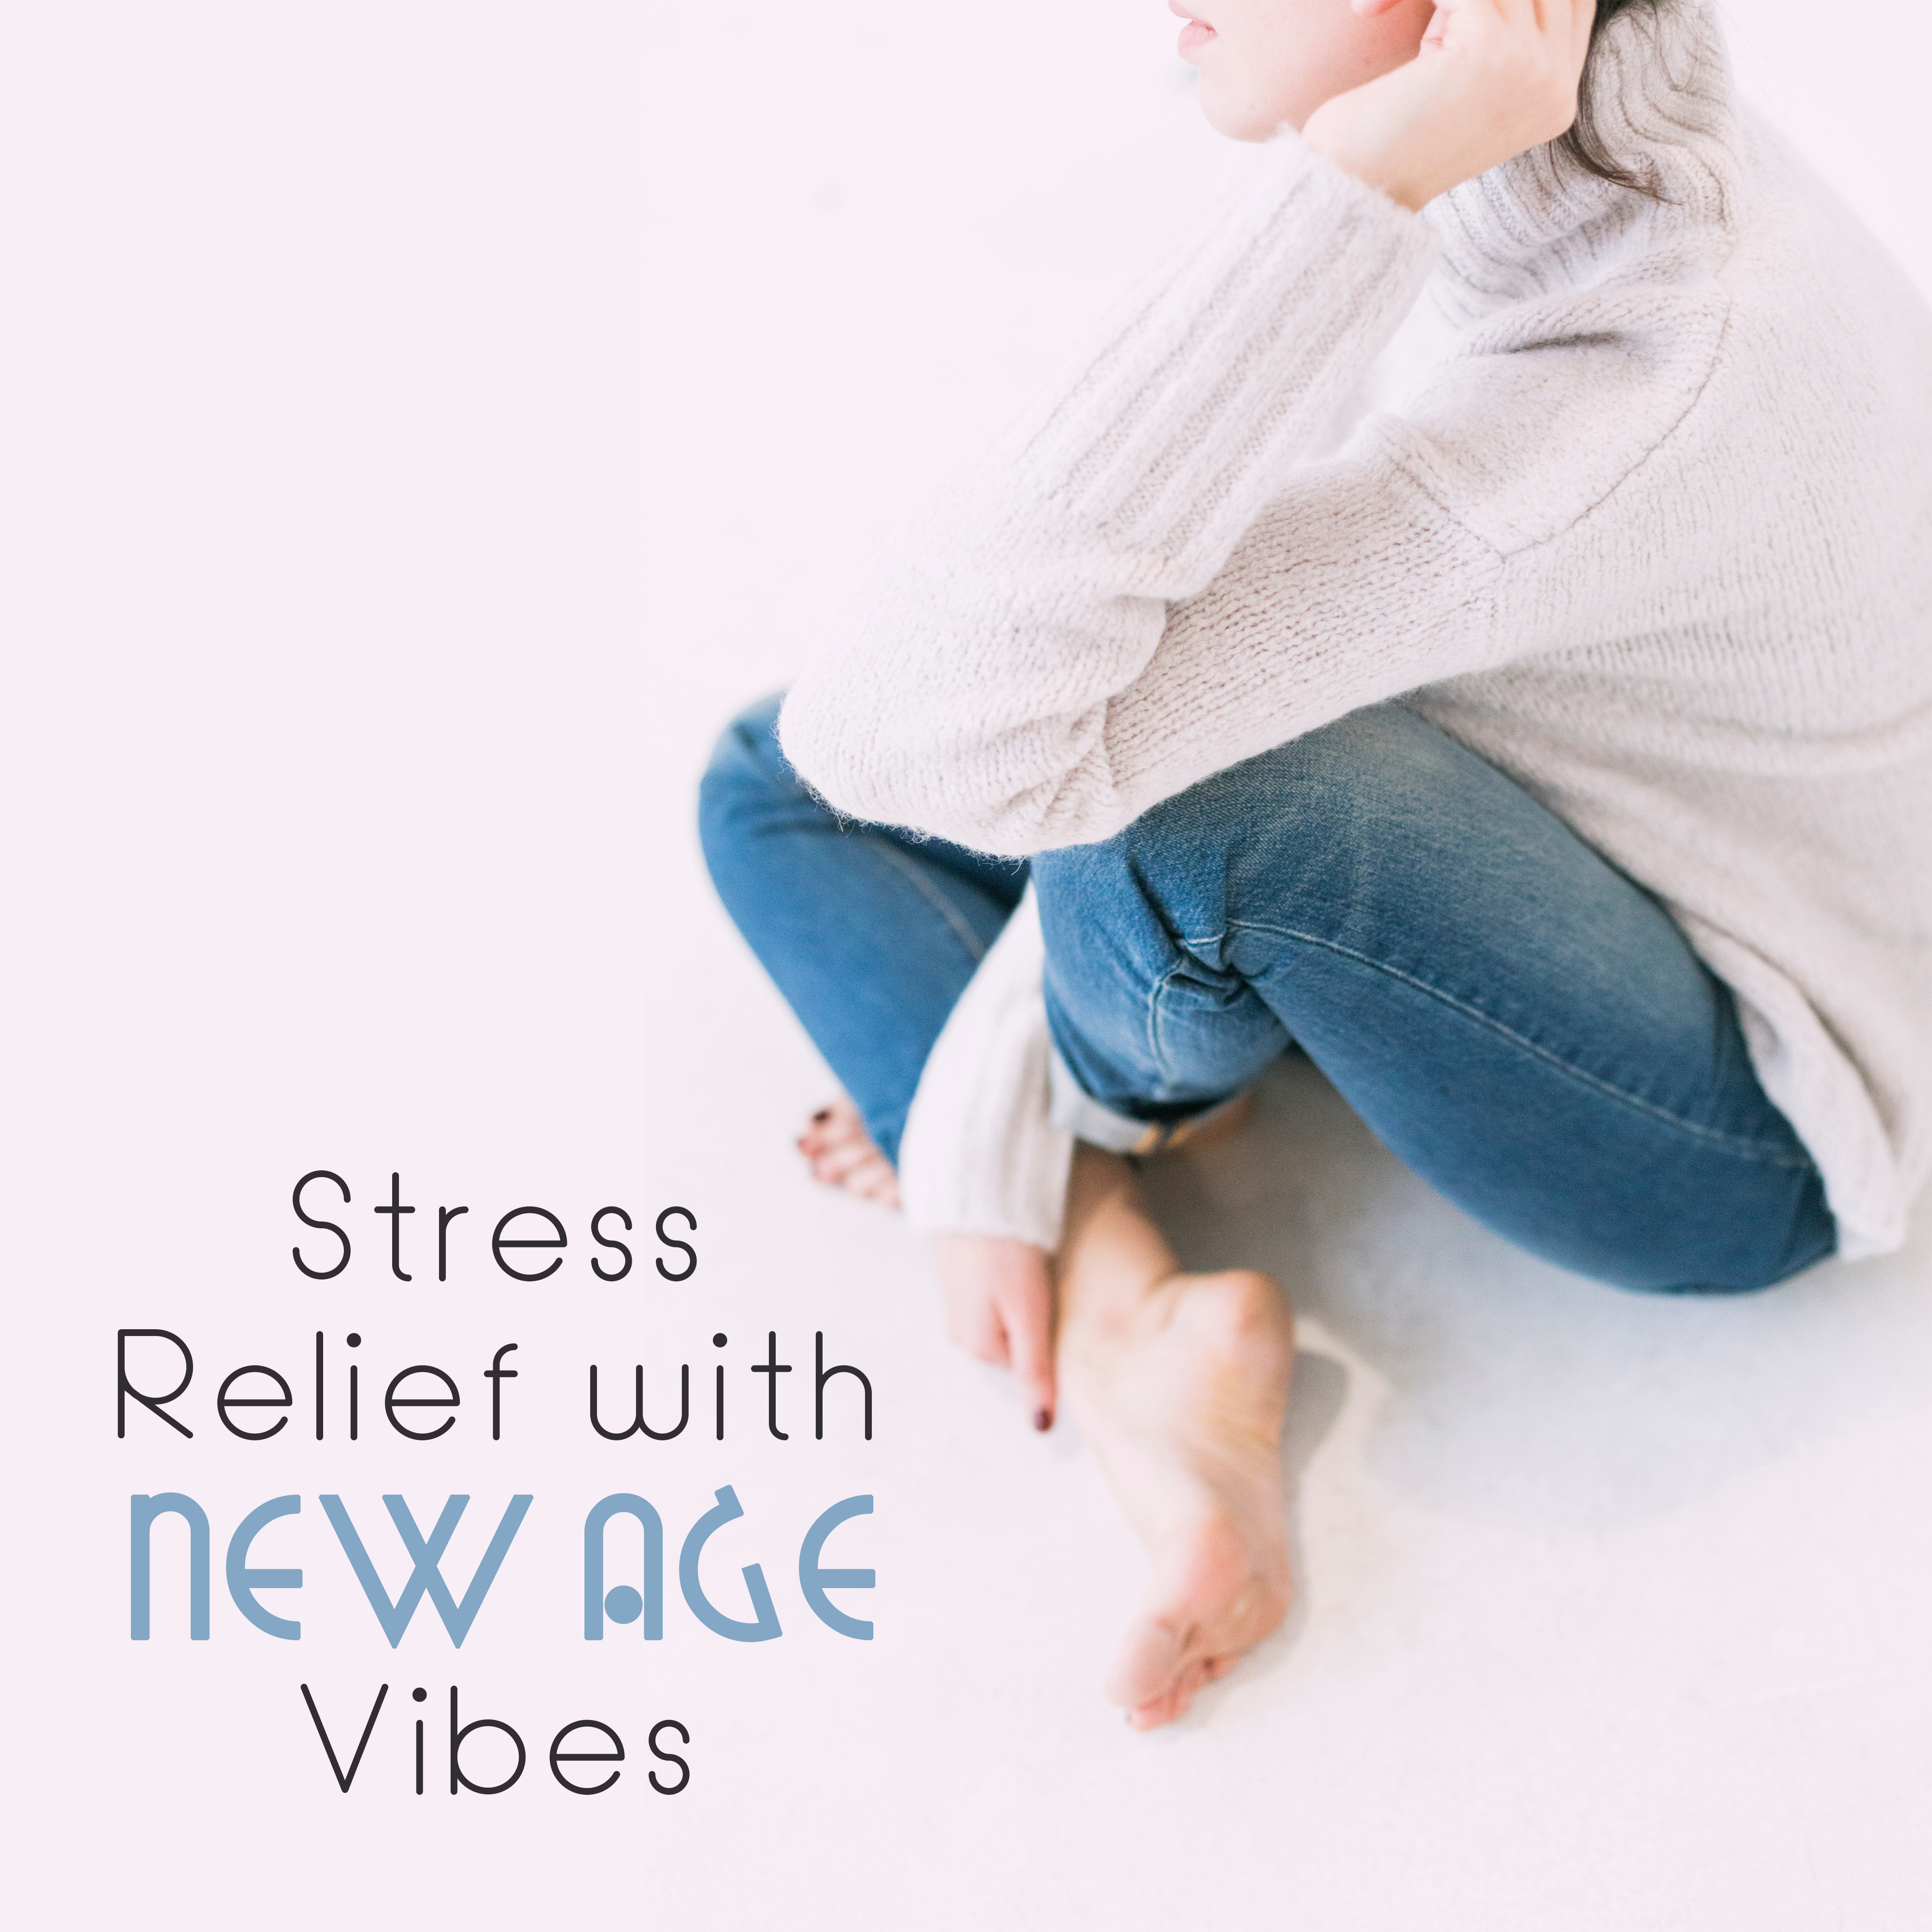 Stress Relief with New Age Vibes